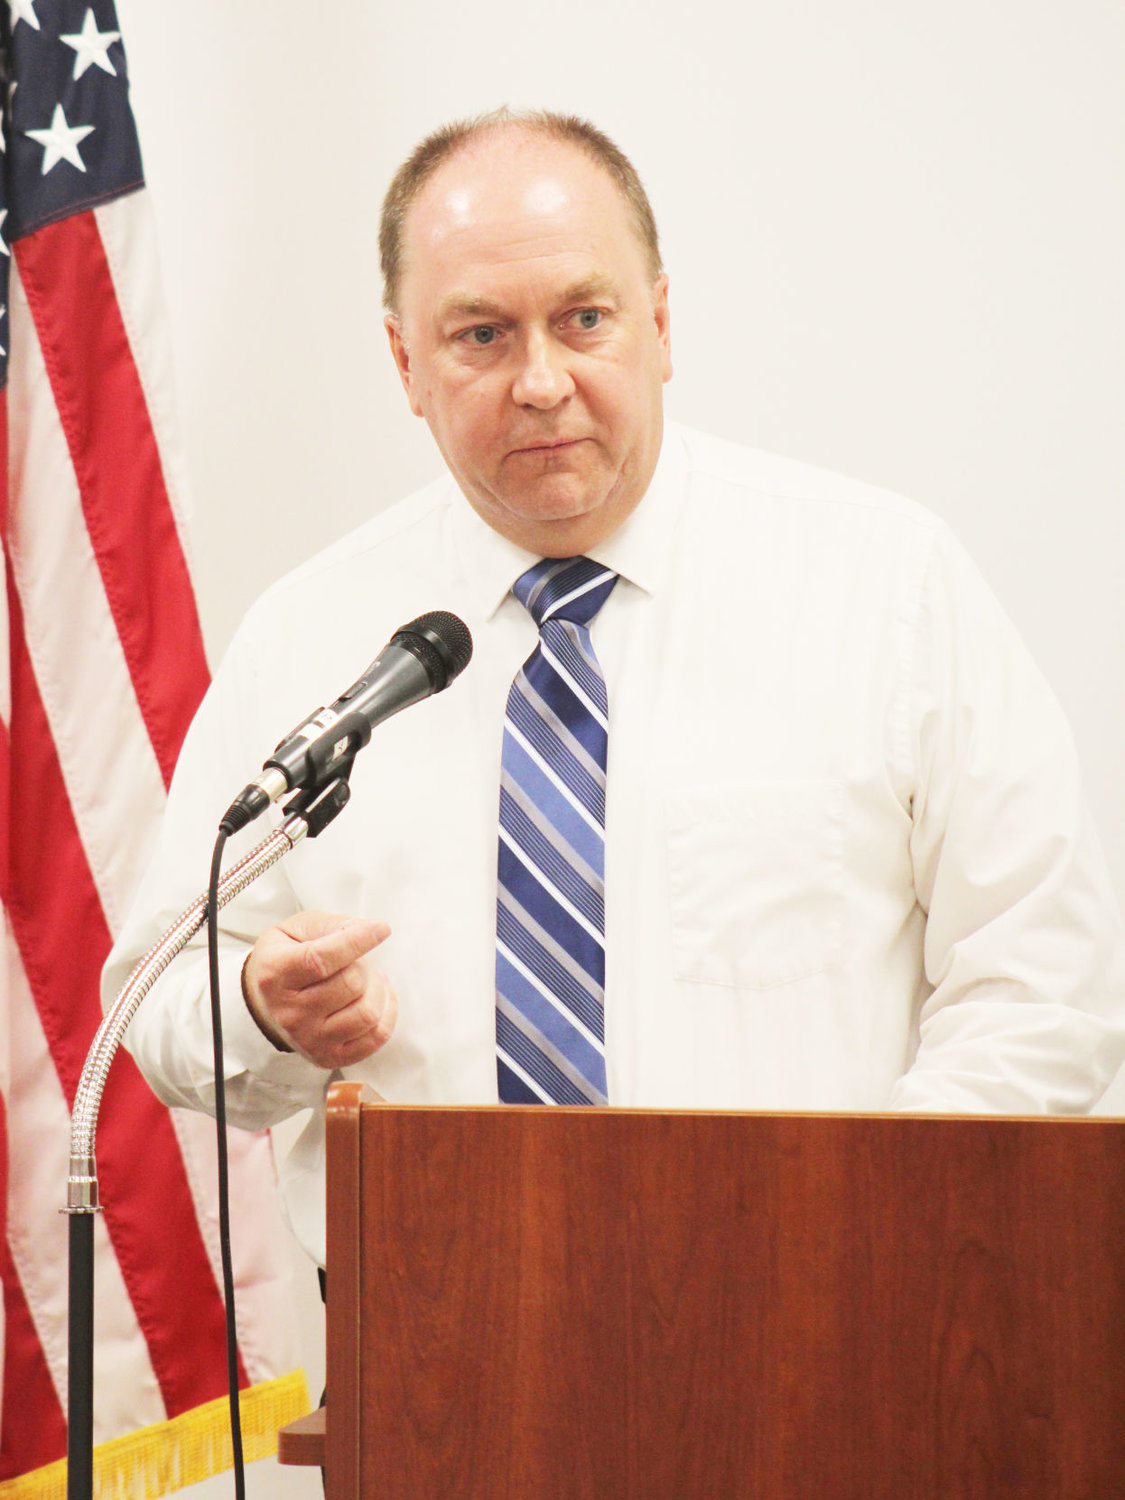 Mayor Todd Barton speaks Monday at the kickoff celebration for the women's suffrage centennial at the Crawfordsville District Public Library.